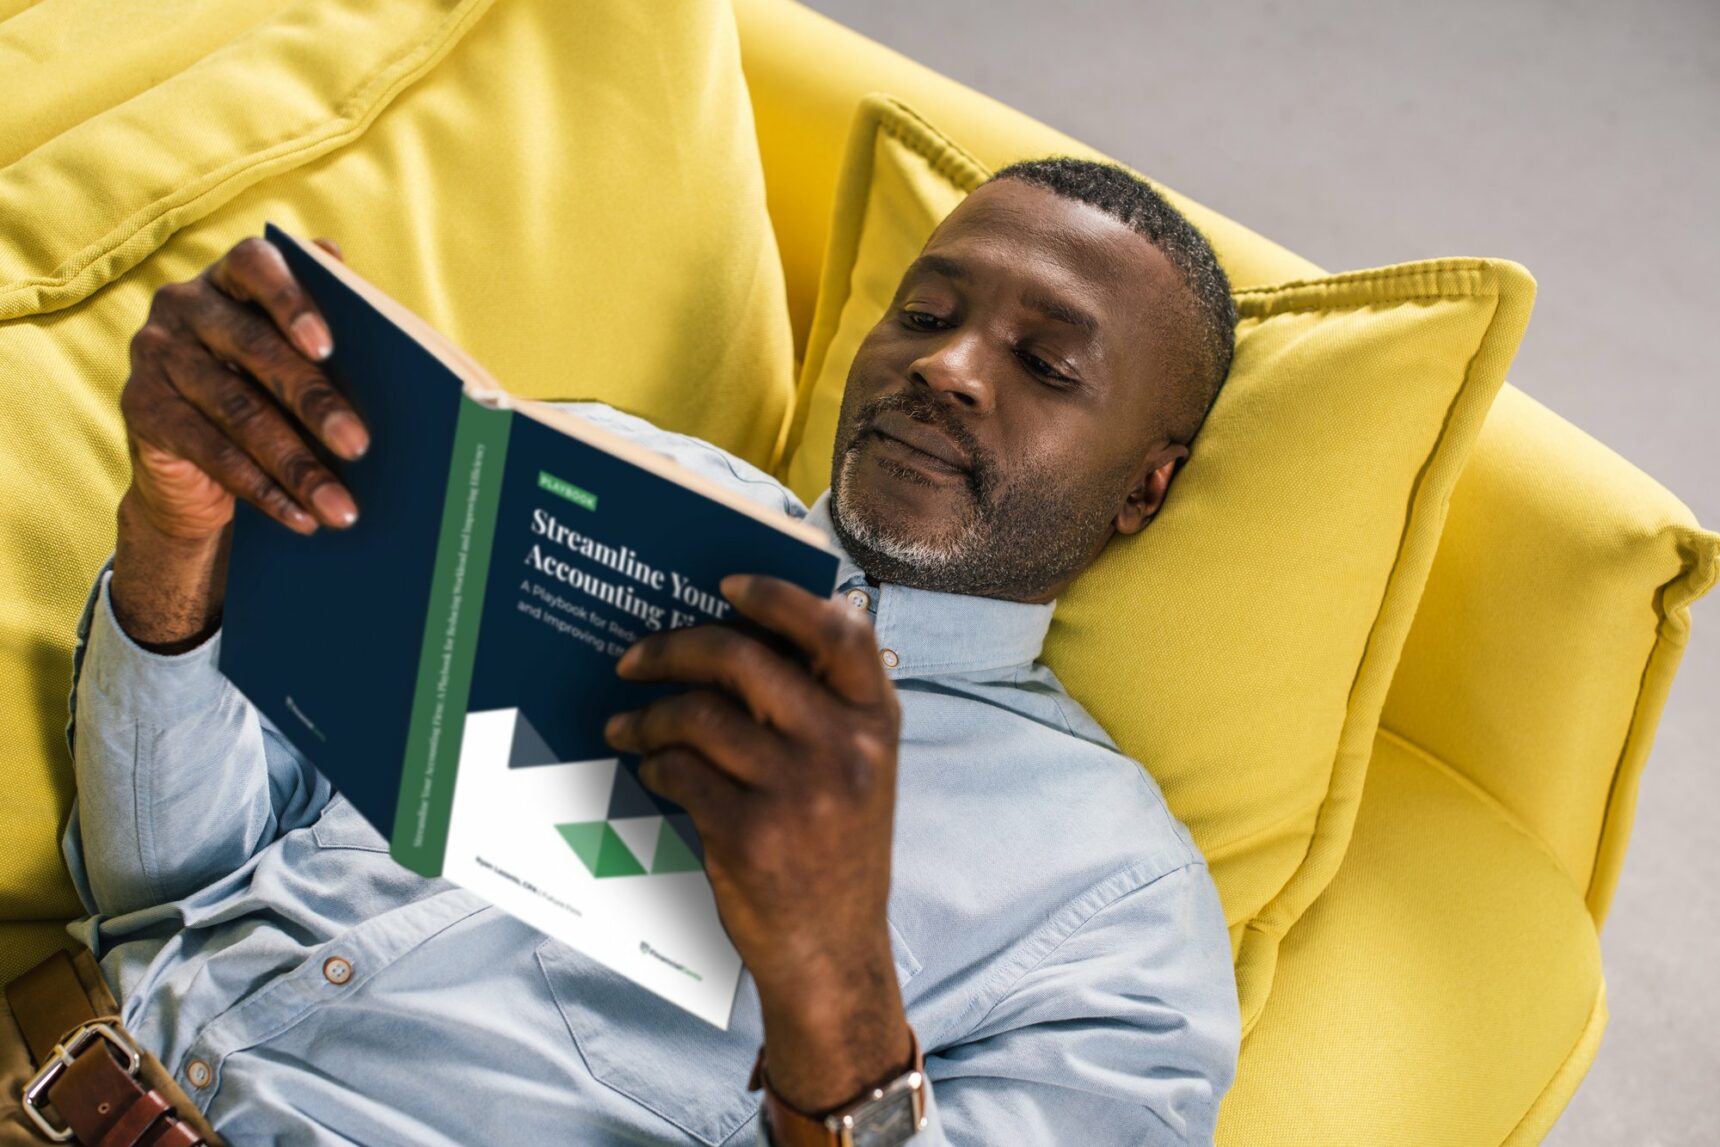 A man reading the playbook 'Streamline Your Accounting Firm: A Playbook for Reducing Workload and Improving Efficiency'